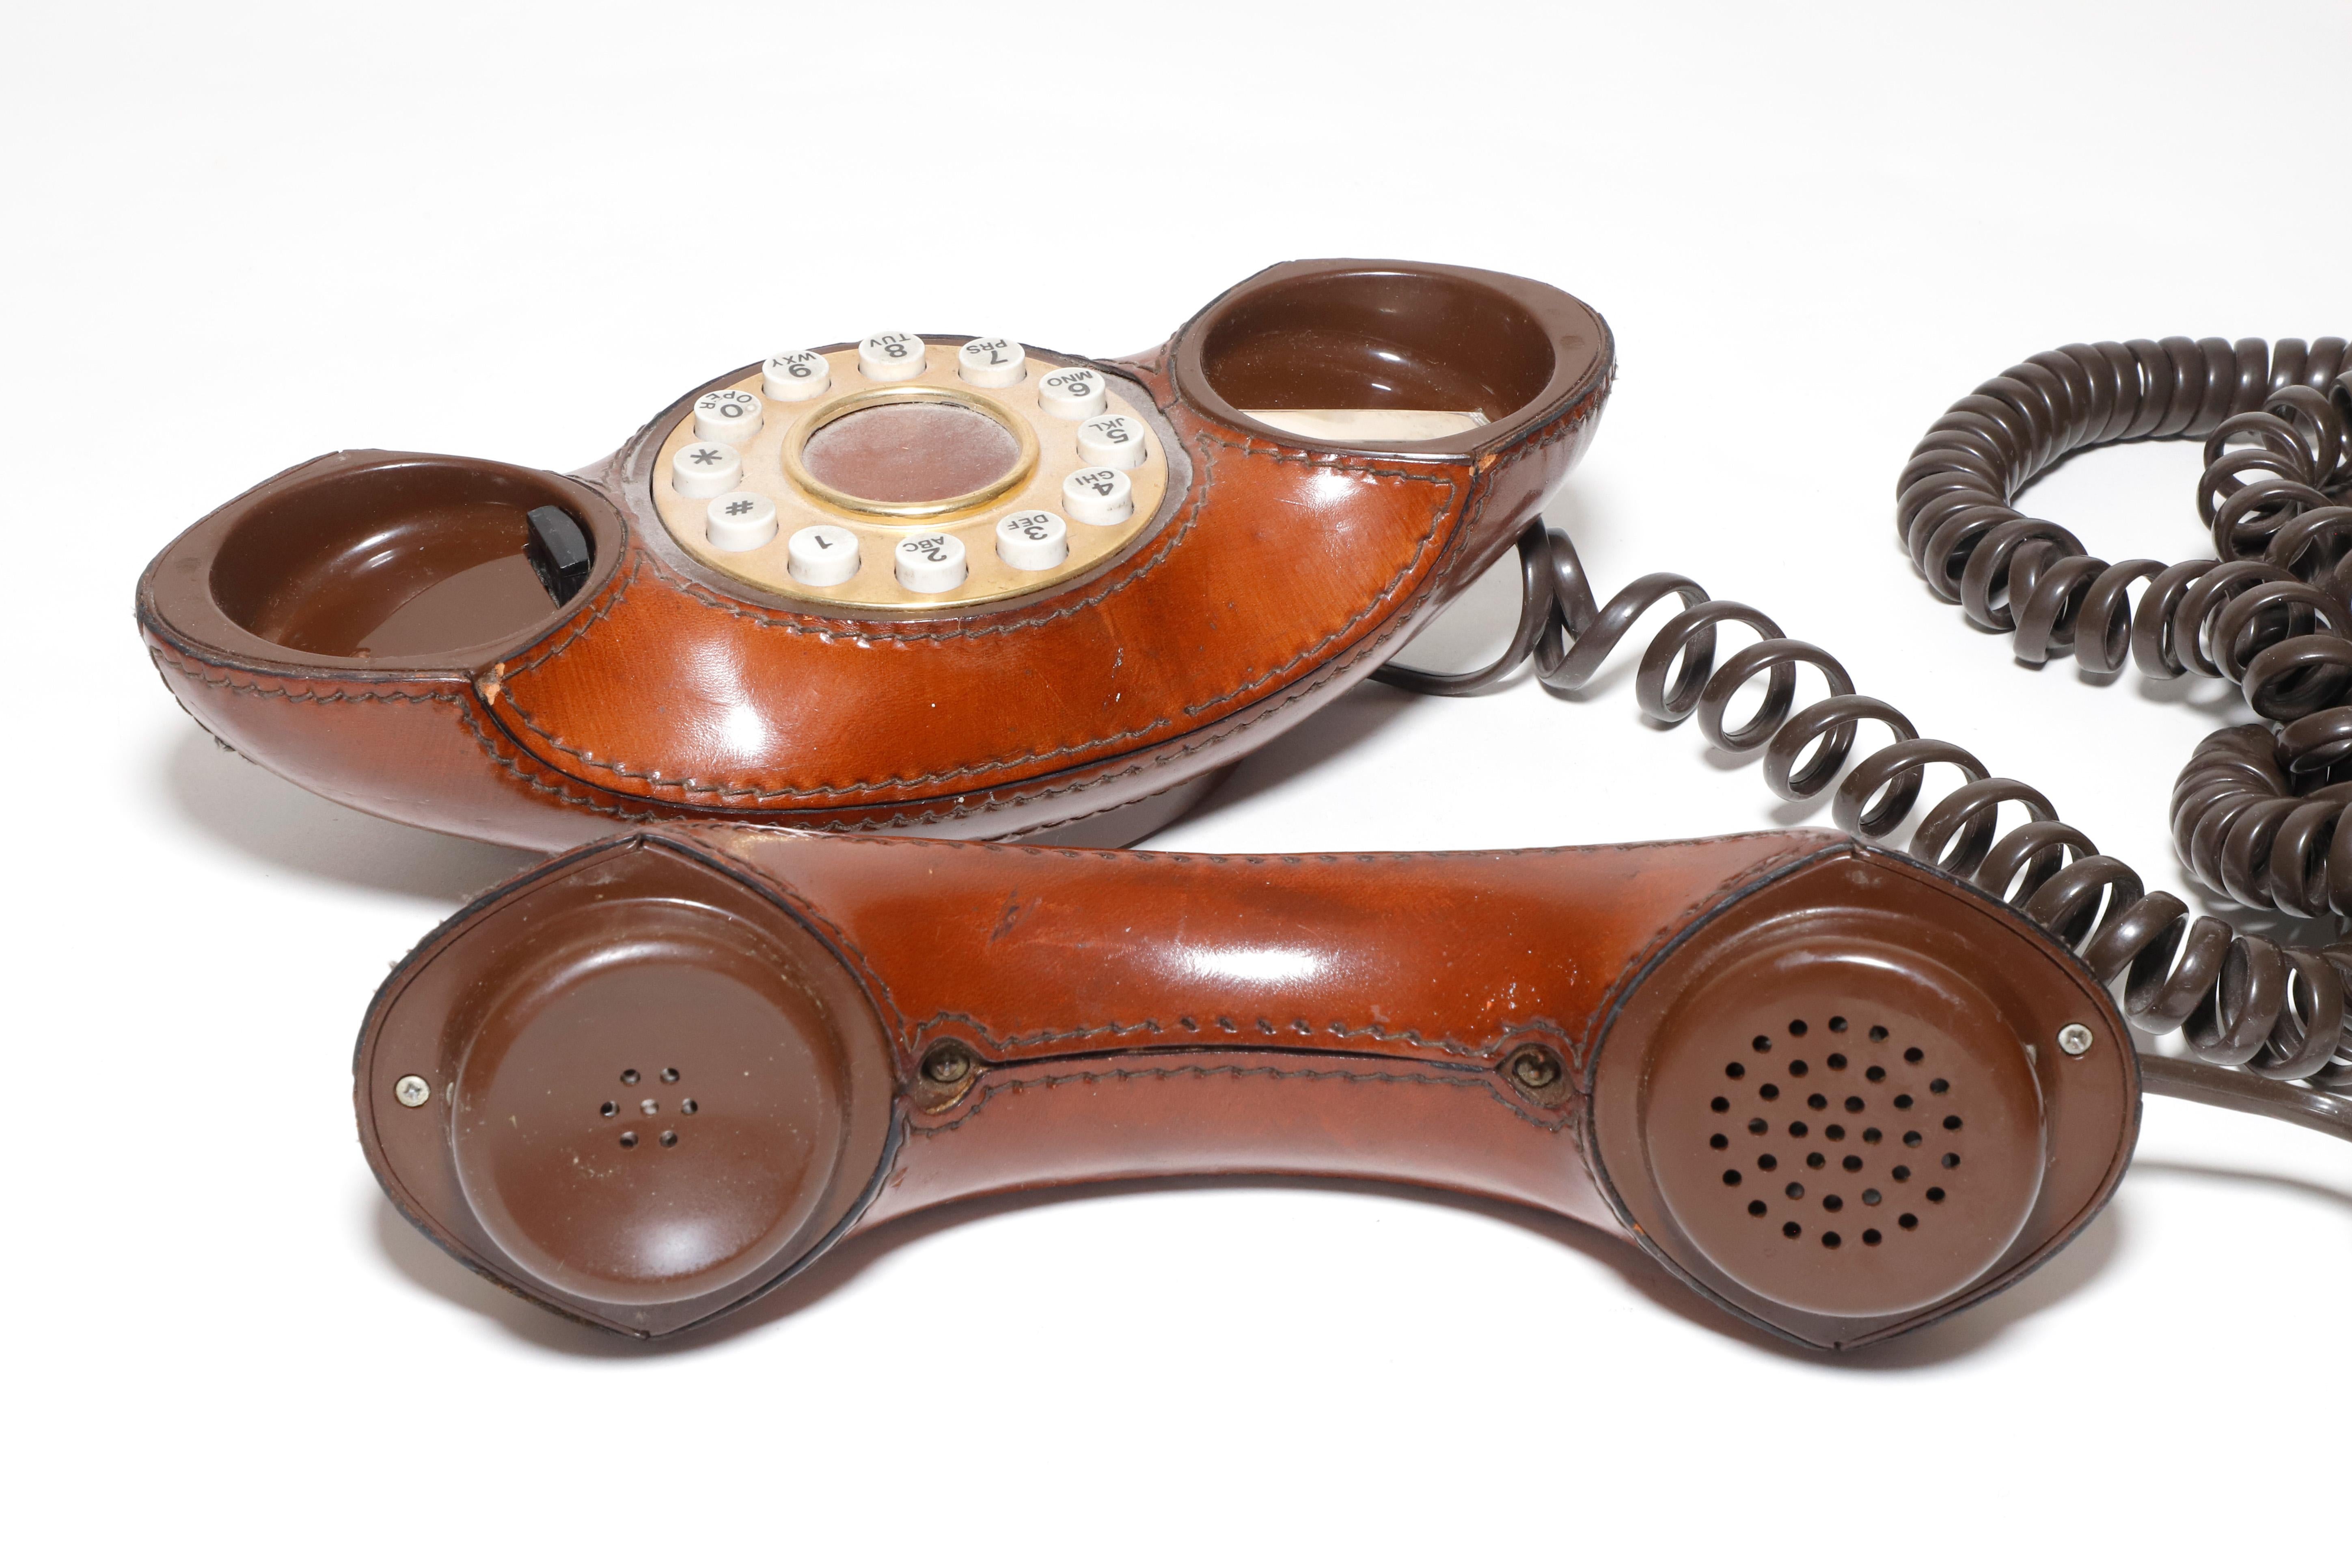 Vintage Genie 1970s Retro Brown Leather Push Butoon Telephone In Good Condition For Sale In New York, NY